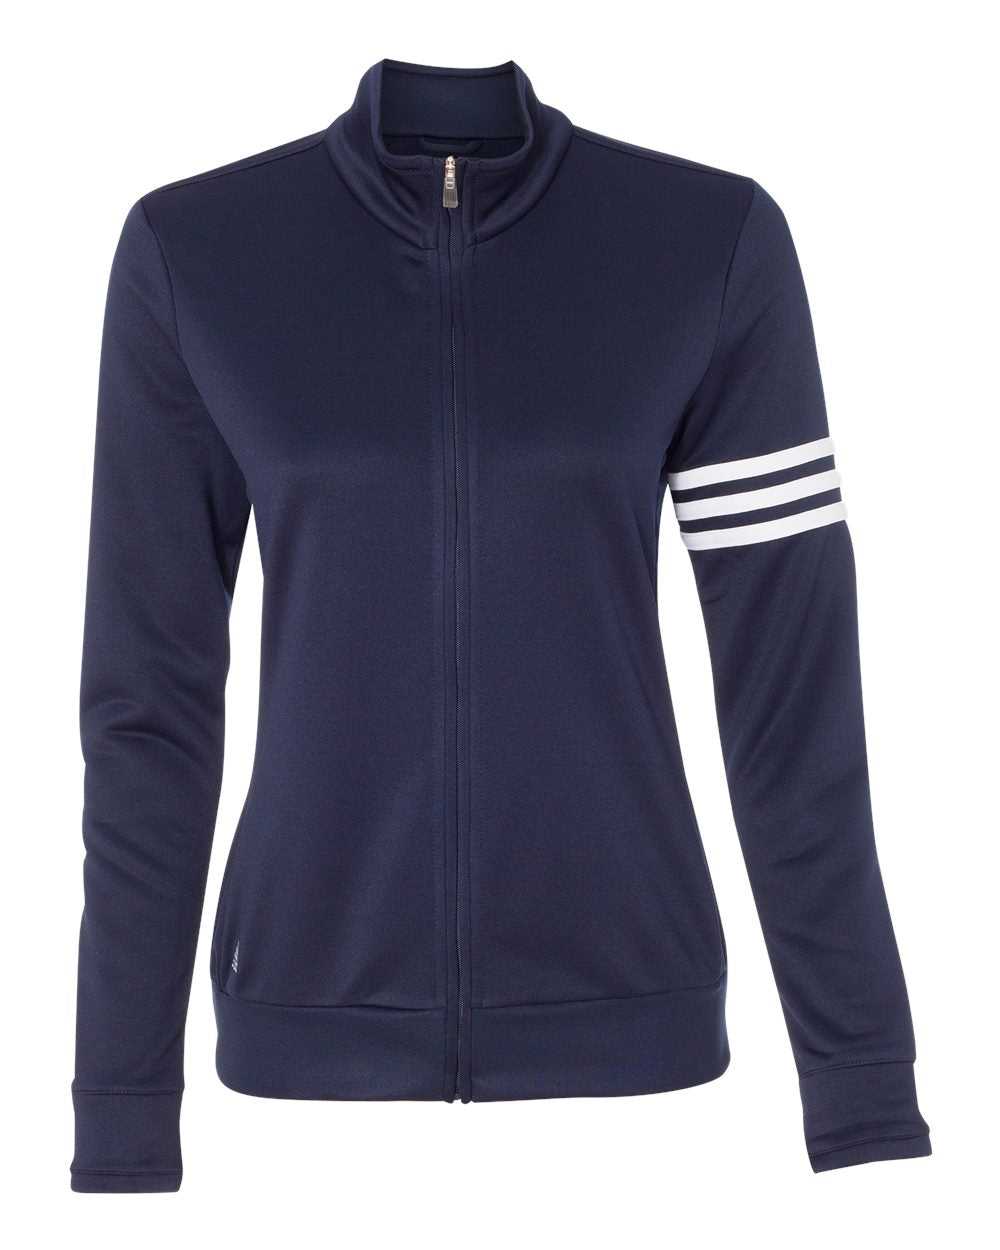 Adidas A191 Women's 3-Stripes French Terry Full-Zip Jacket - Navy White - HIT a Double